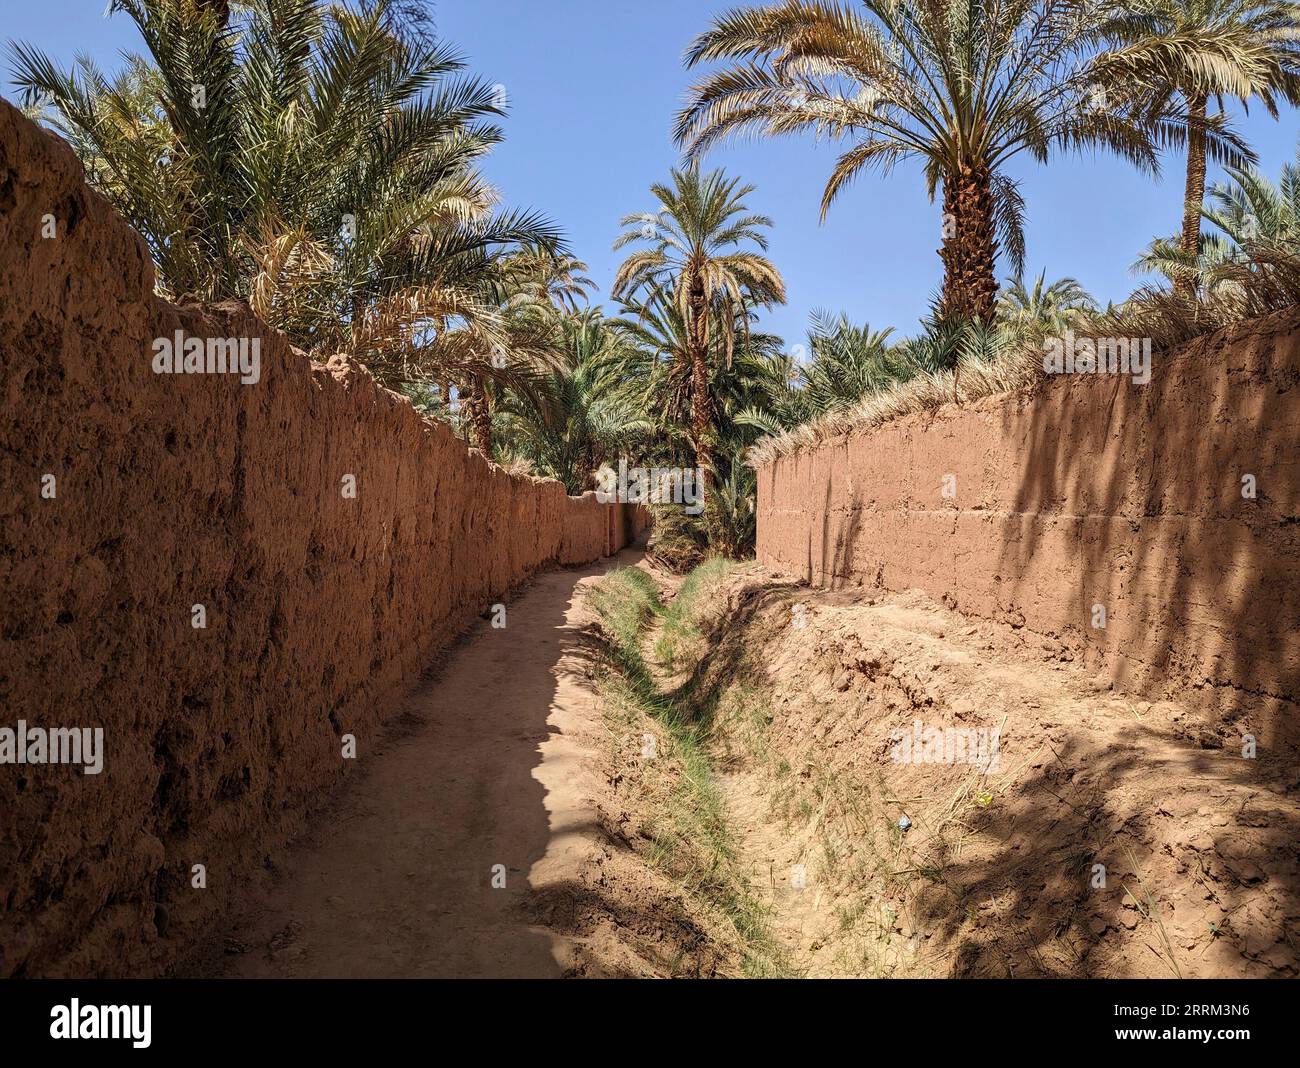 A hiker in a scenic agriculture landscape in the beautiful Draa valley, palm groves surrounding the hiking path, Morocco Stock Photo